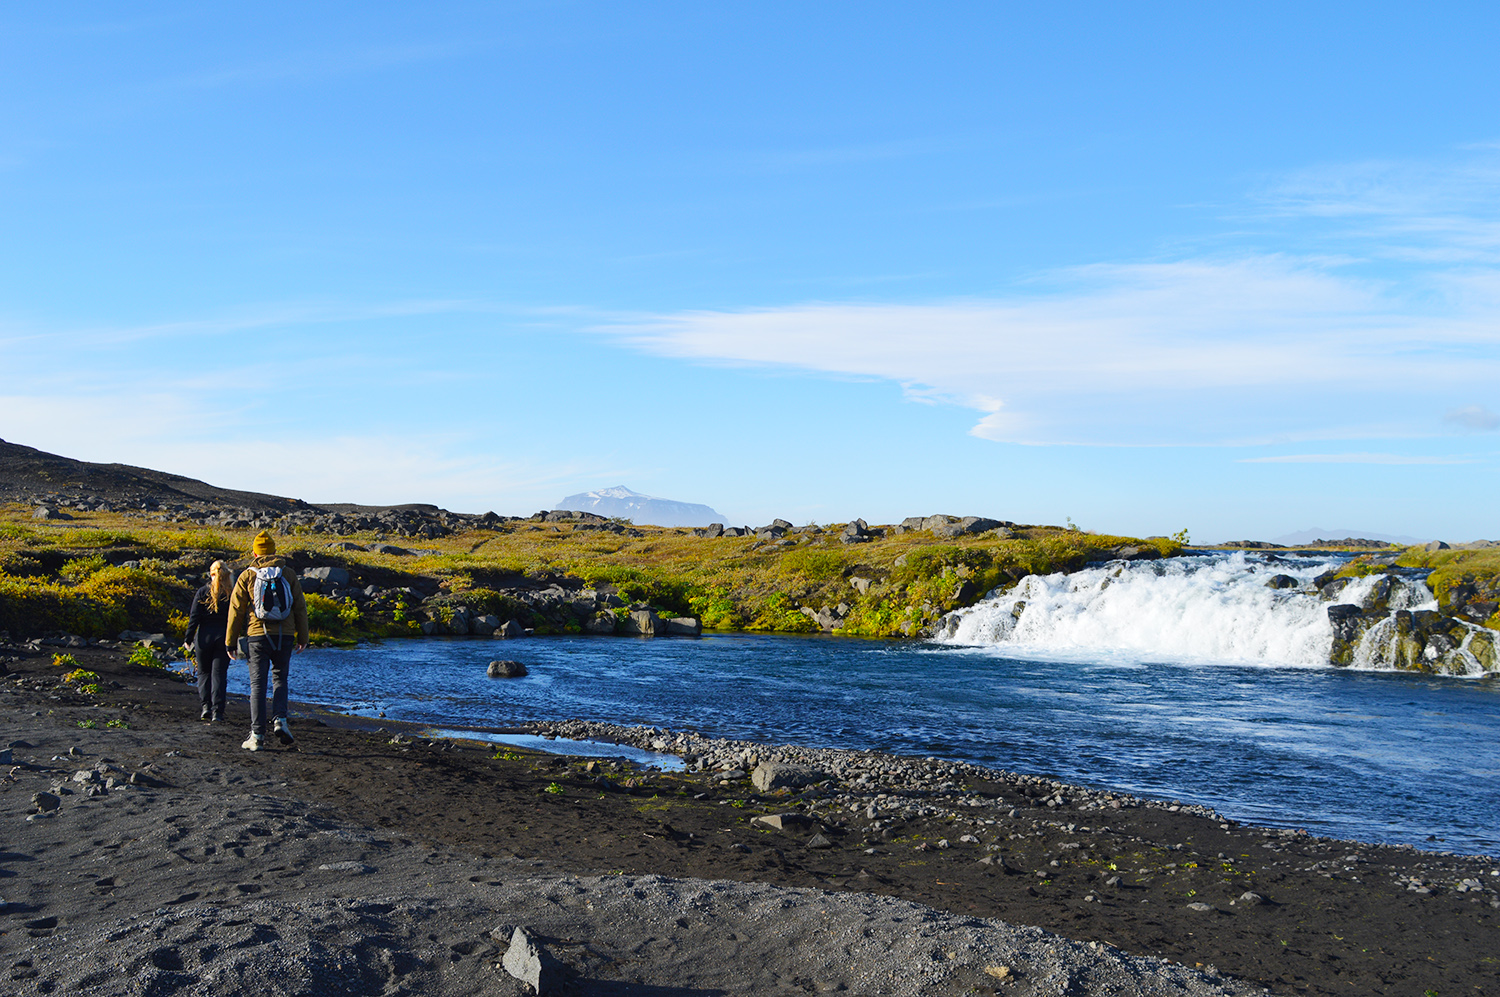 Daan on his way to fill his drinking bottle with lava filtered Icelandic water © Coupleofmen.com